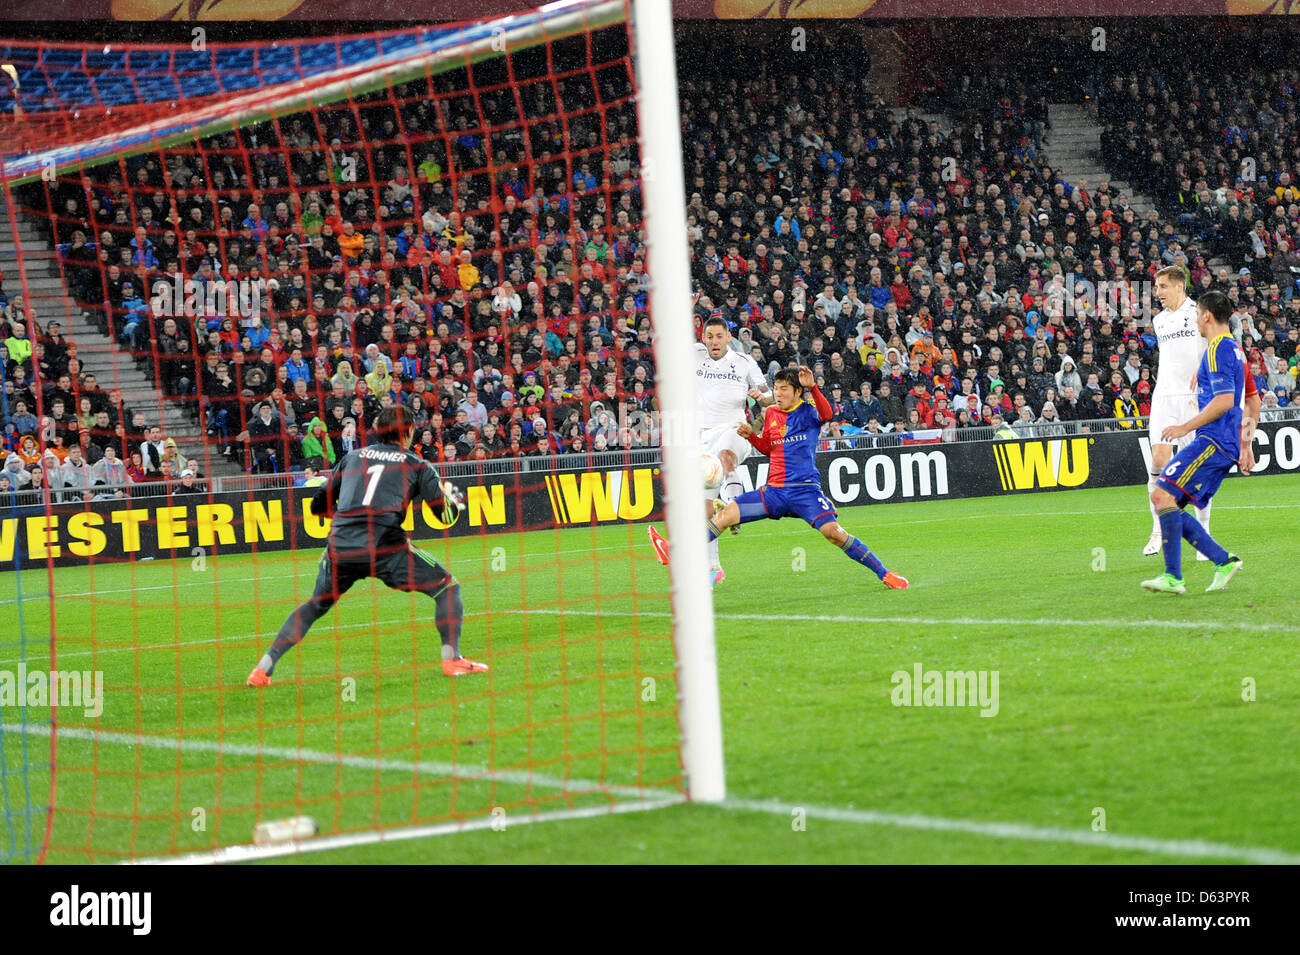 Basel, Switzerland. 11th April 2013. Clint Dempsey of Tottenham Hotspur equalises at 2-2 late in the Europa League game between FC Basel and Tottenham Hotspur from St. Jakob-Park. Stock Photo